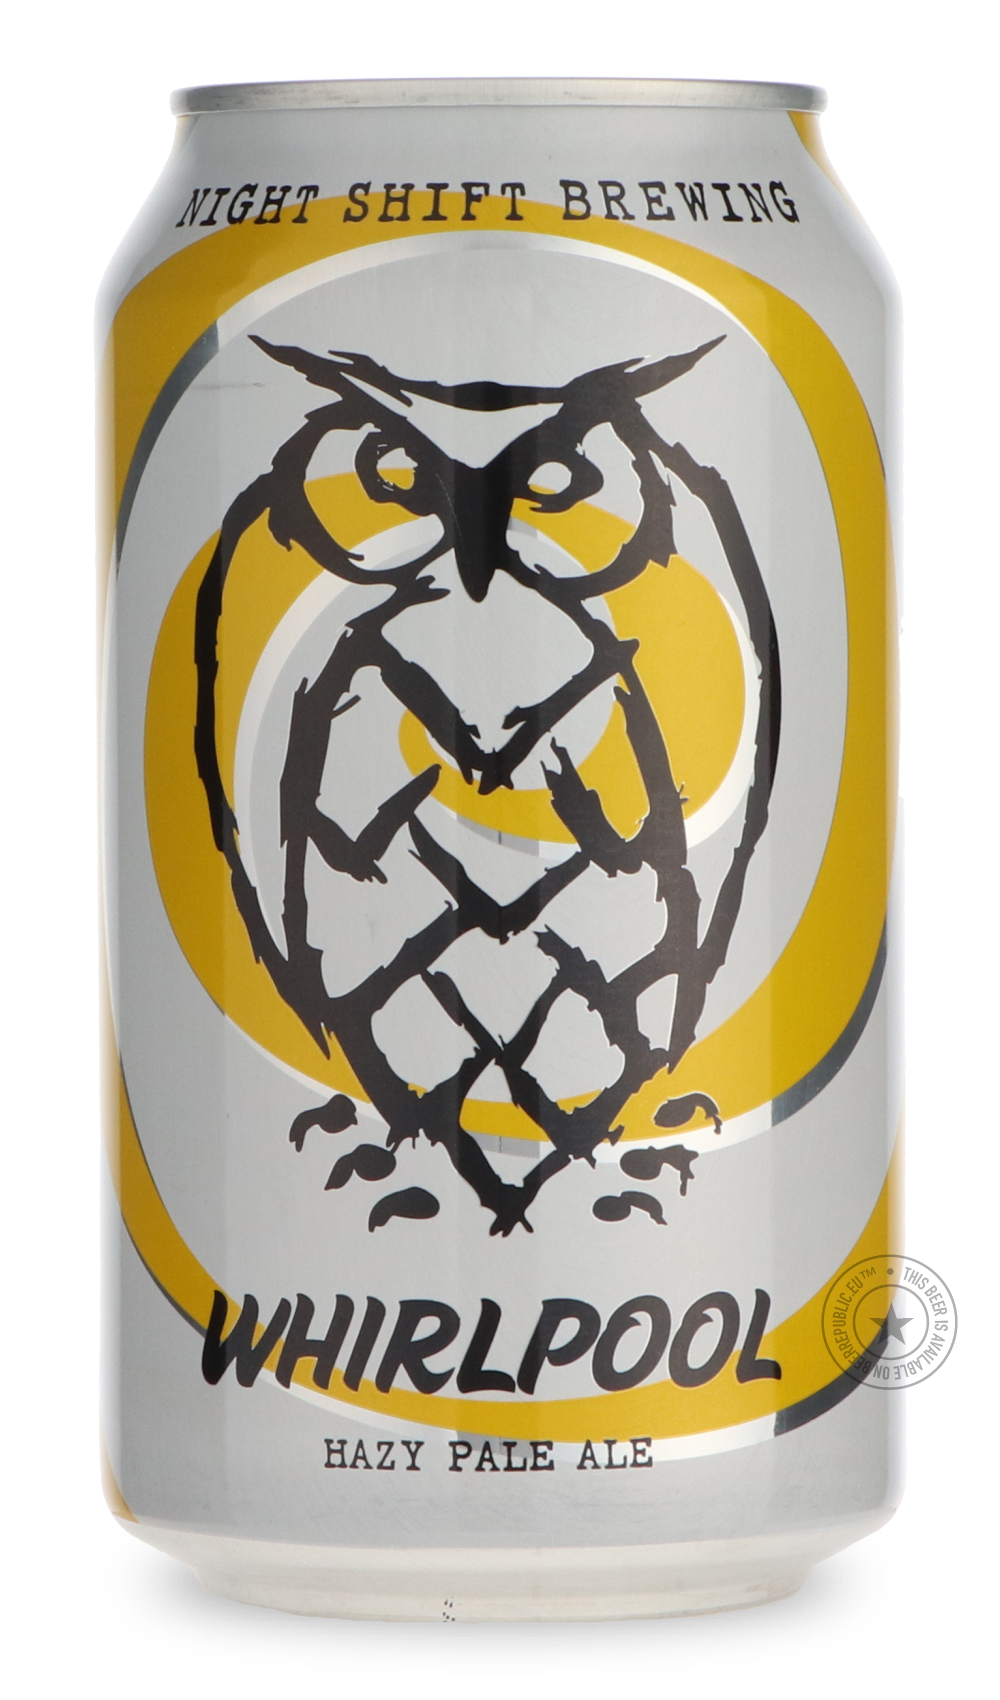 -Night Shift- Whirlpool-Pale- Only @ Beer Republic - The best online beer store for American & Canadian craft beer - Buy beer online from the USA and Canada - Bier online kopen - Amerikaans bier kopen - Craft beer store - Craft beer kopen - Amerikanisch bier kaufen - Bier online kaufen - Acheter biere online - IPA - Stout - Porter - New England IPA - Hazy IPA - Imperial Stout - Barrel Aged - Barrel Aged Imperial Stout - Brown - Dark beer - Blond - Blonde - Pilsner - Lager - Wheat - Weizen - Amber - Barley W